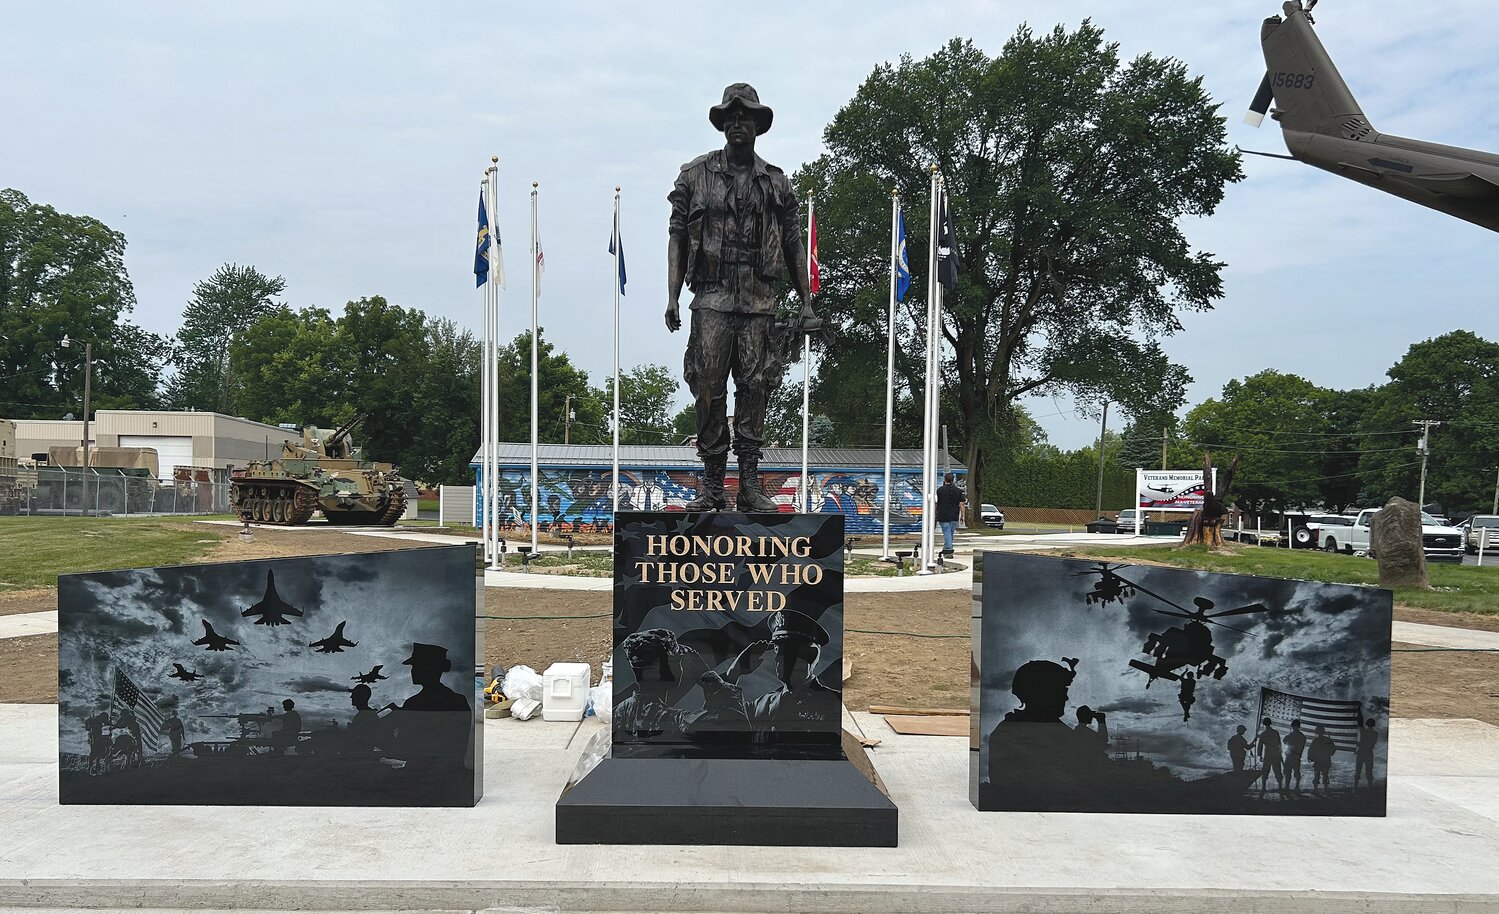 A new centerpiece was installed Wednesday at Veterans Memorial Park on South Washington Street. The nearly 11-foot-tall statue and 23-foot-wide monument was donated by Allen Monument Company and installed by BNL Engineering. The statue depicts a Vietnam era soldier that is flanked by two jet black granite panels. Each panel contains laser-etched military scenes. The center granite piece is inscribed with the words, “Honoring Those Who Served.”